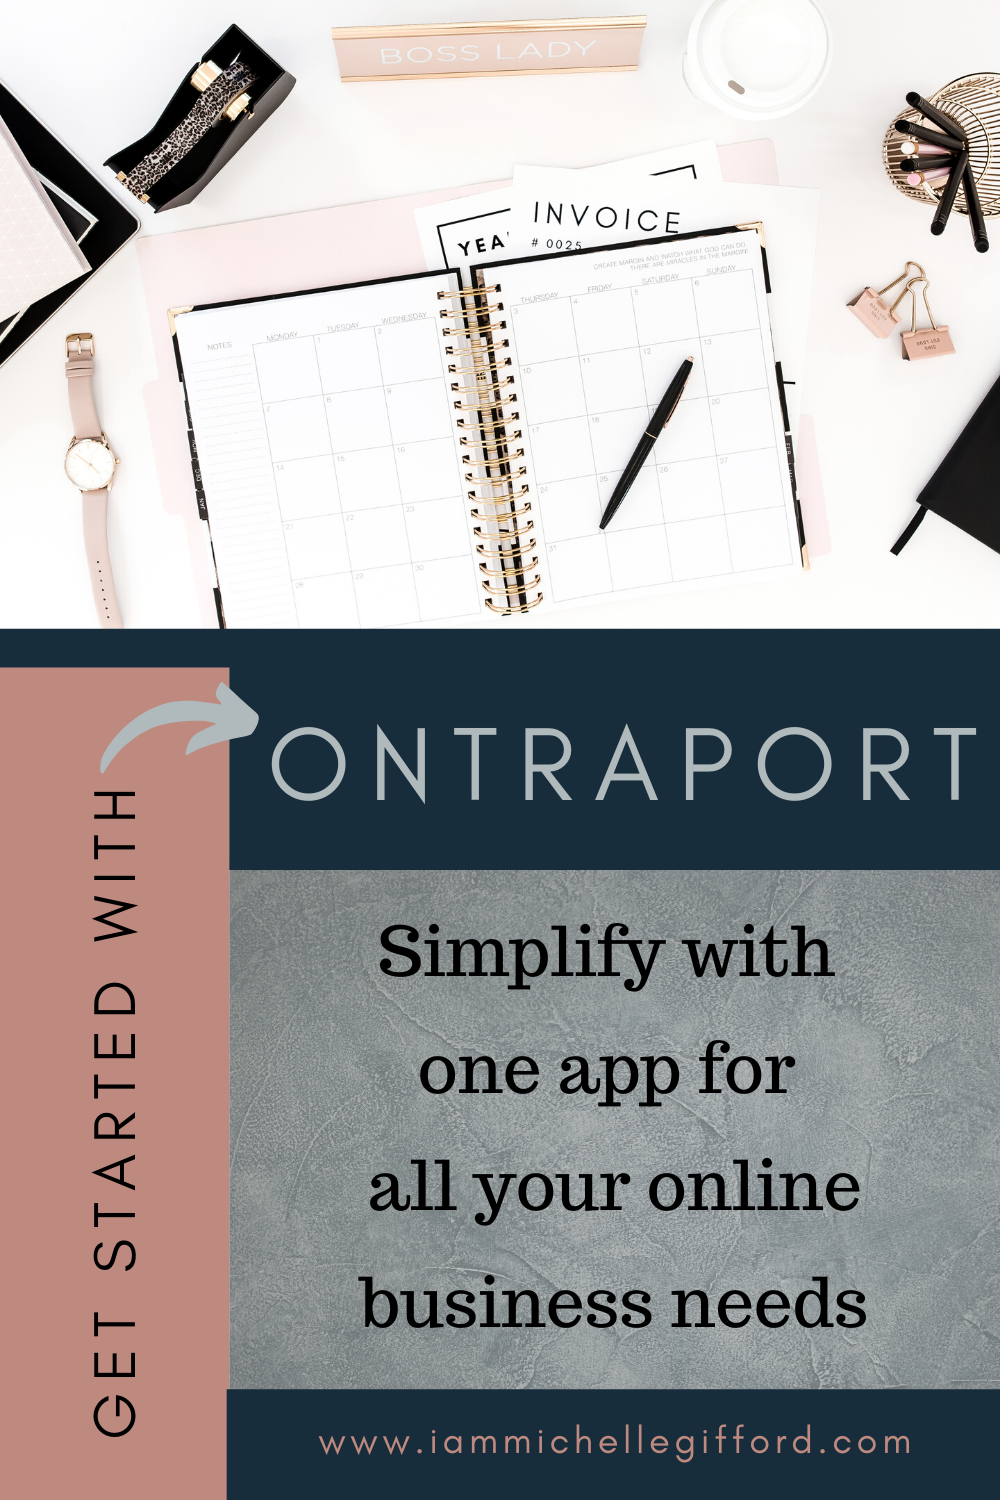 Get Started with Ontraport-One app for Managing Online Business www.iammichellegifford.com